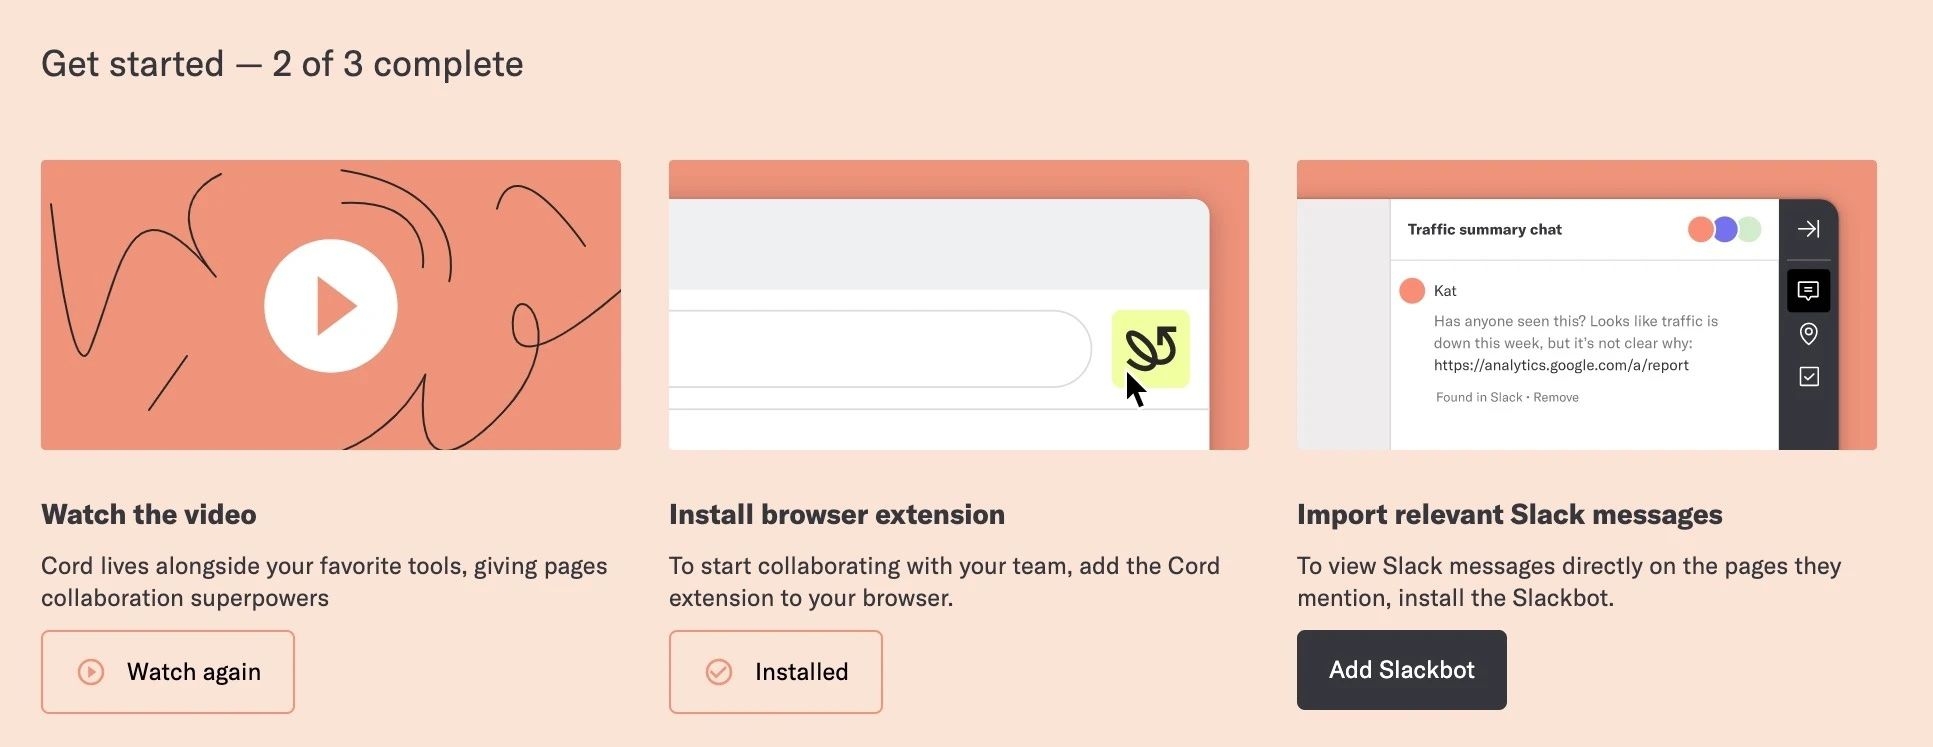 A screen capture of the Cord onboarding flow